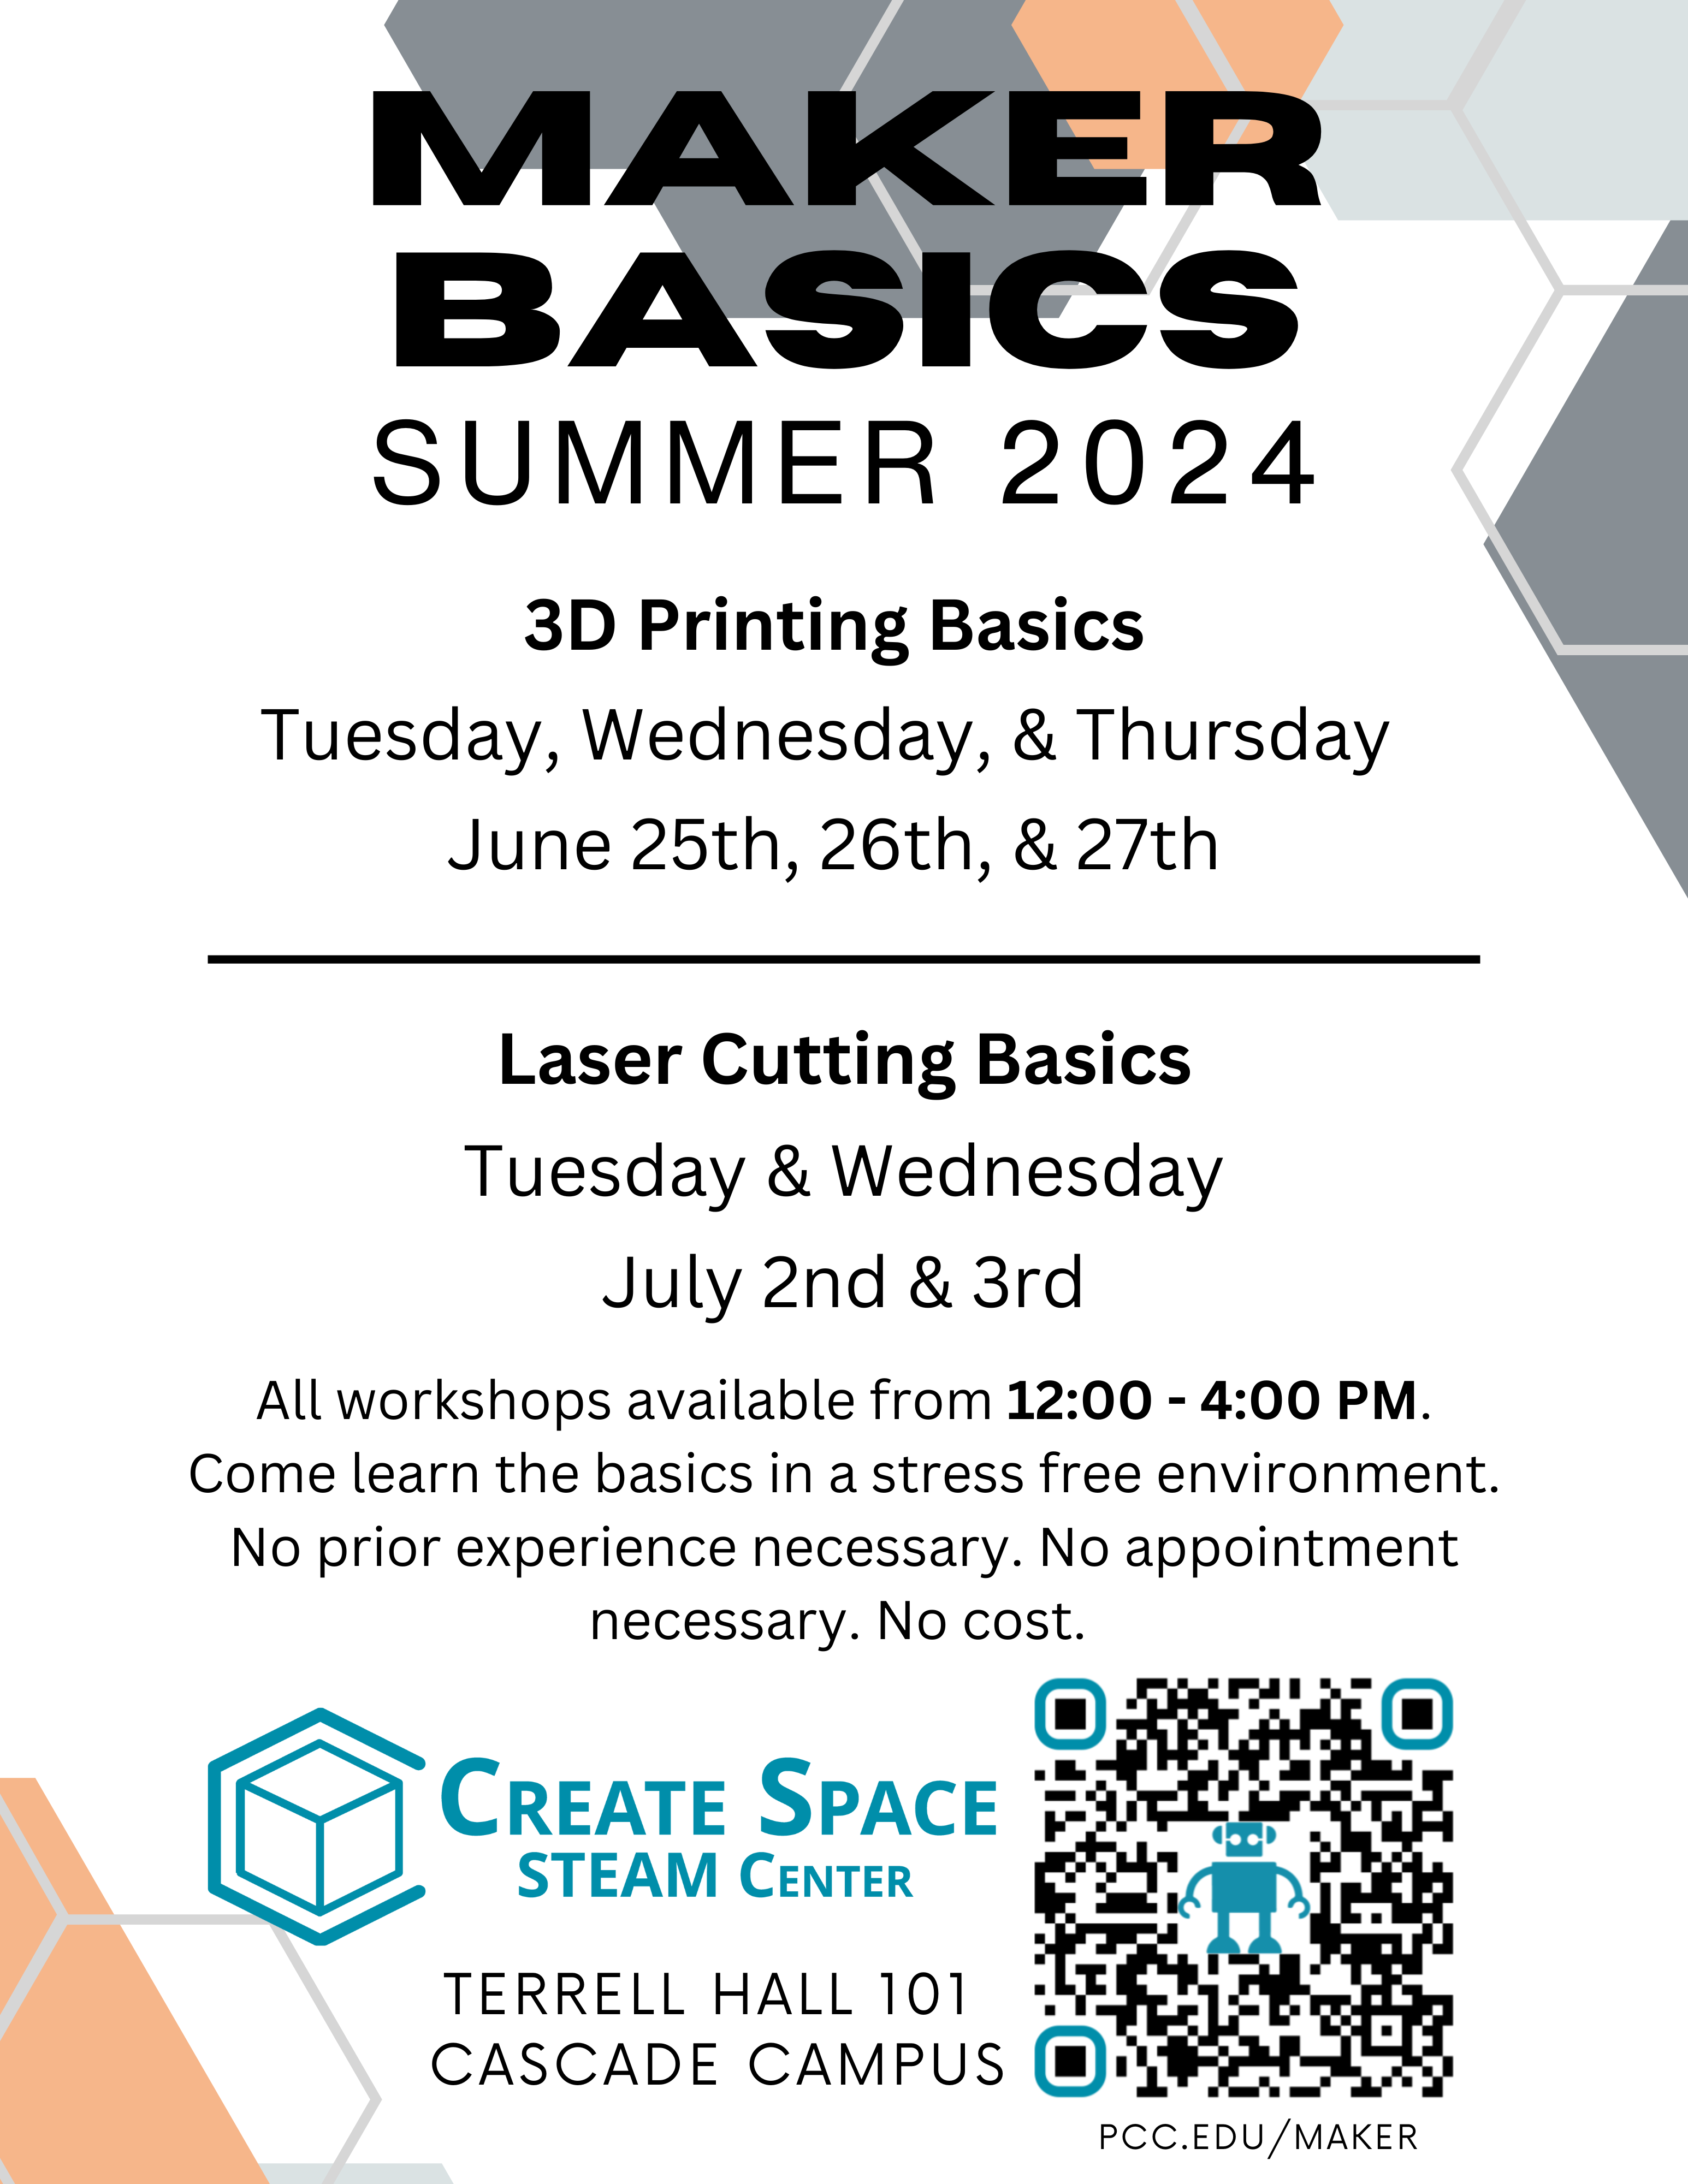 Maker Basics
Summer 2024
Cascade Create Space STEAM Center

3D Printing Basics
Tuesday, Wednesday, & Thursday 
June 25th, 26th, & 27th

Laser Cutting Basics
Tuesday & Wednesday
July 2nd & 3rd

All workshops available from 12:00 - 4:00 PM.
Come learn the basics in a stress free environment.
No prior experience necessary. No appointment necessary. No cost.

Terrell Hall 101 
Cascade Campus
pcc.edu/maker